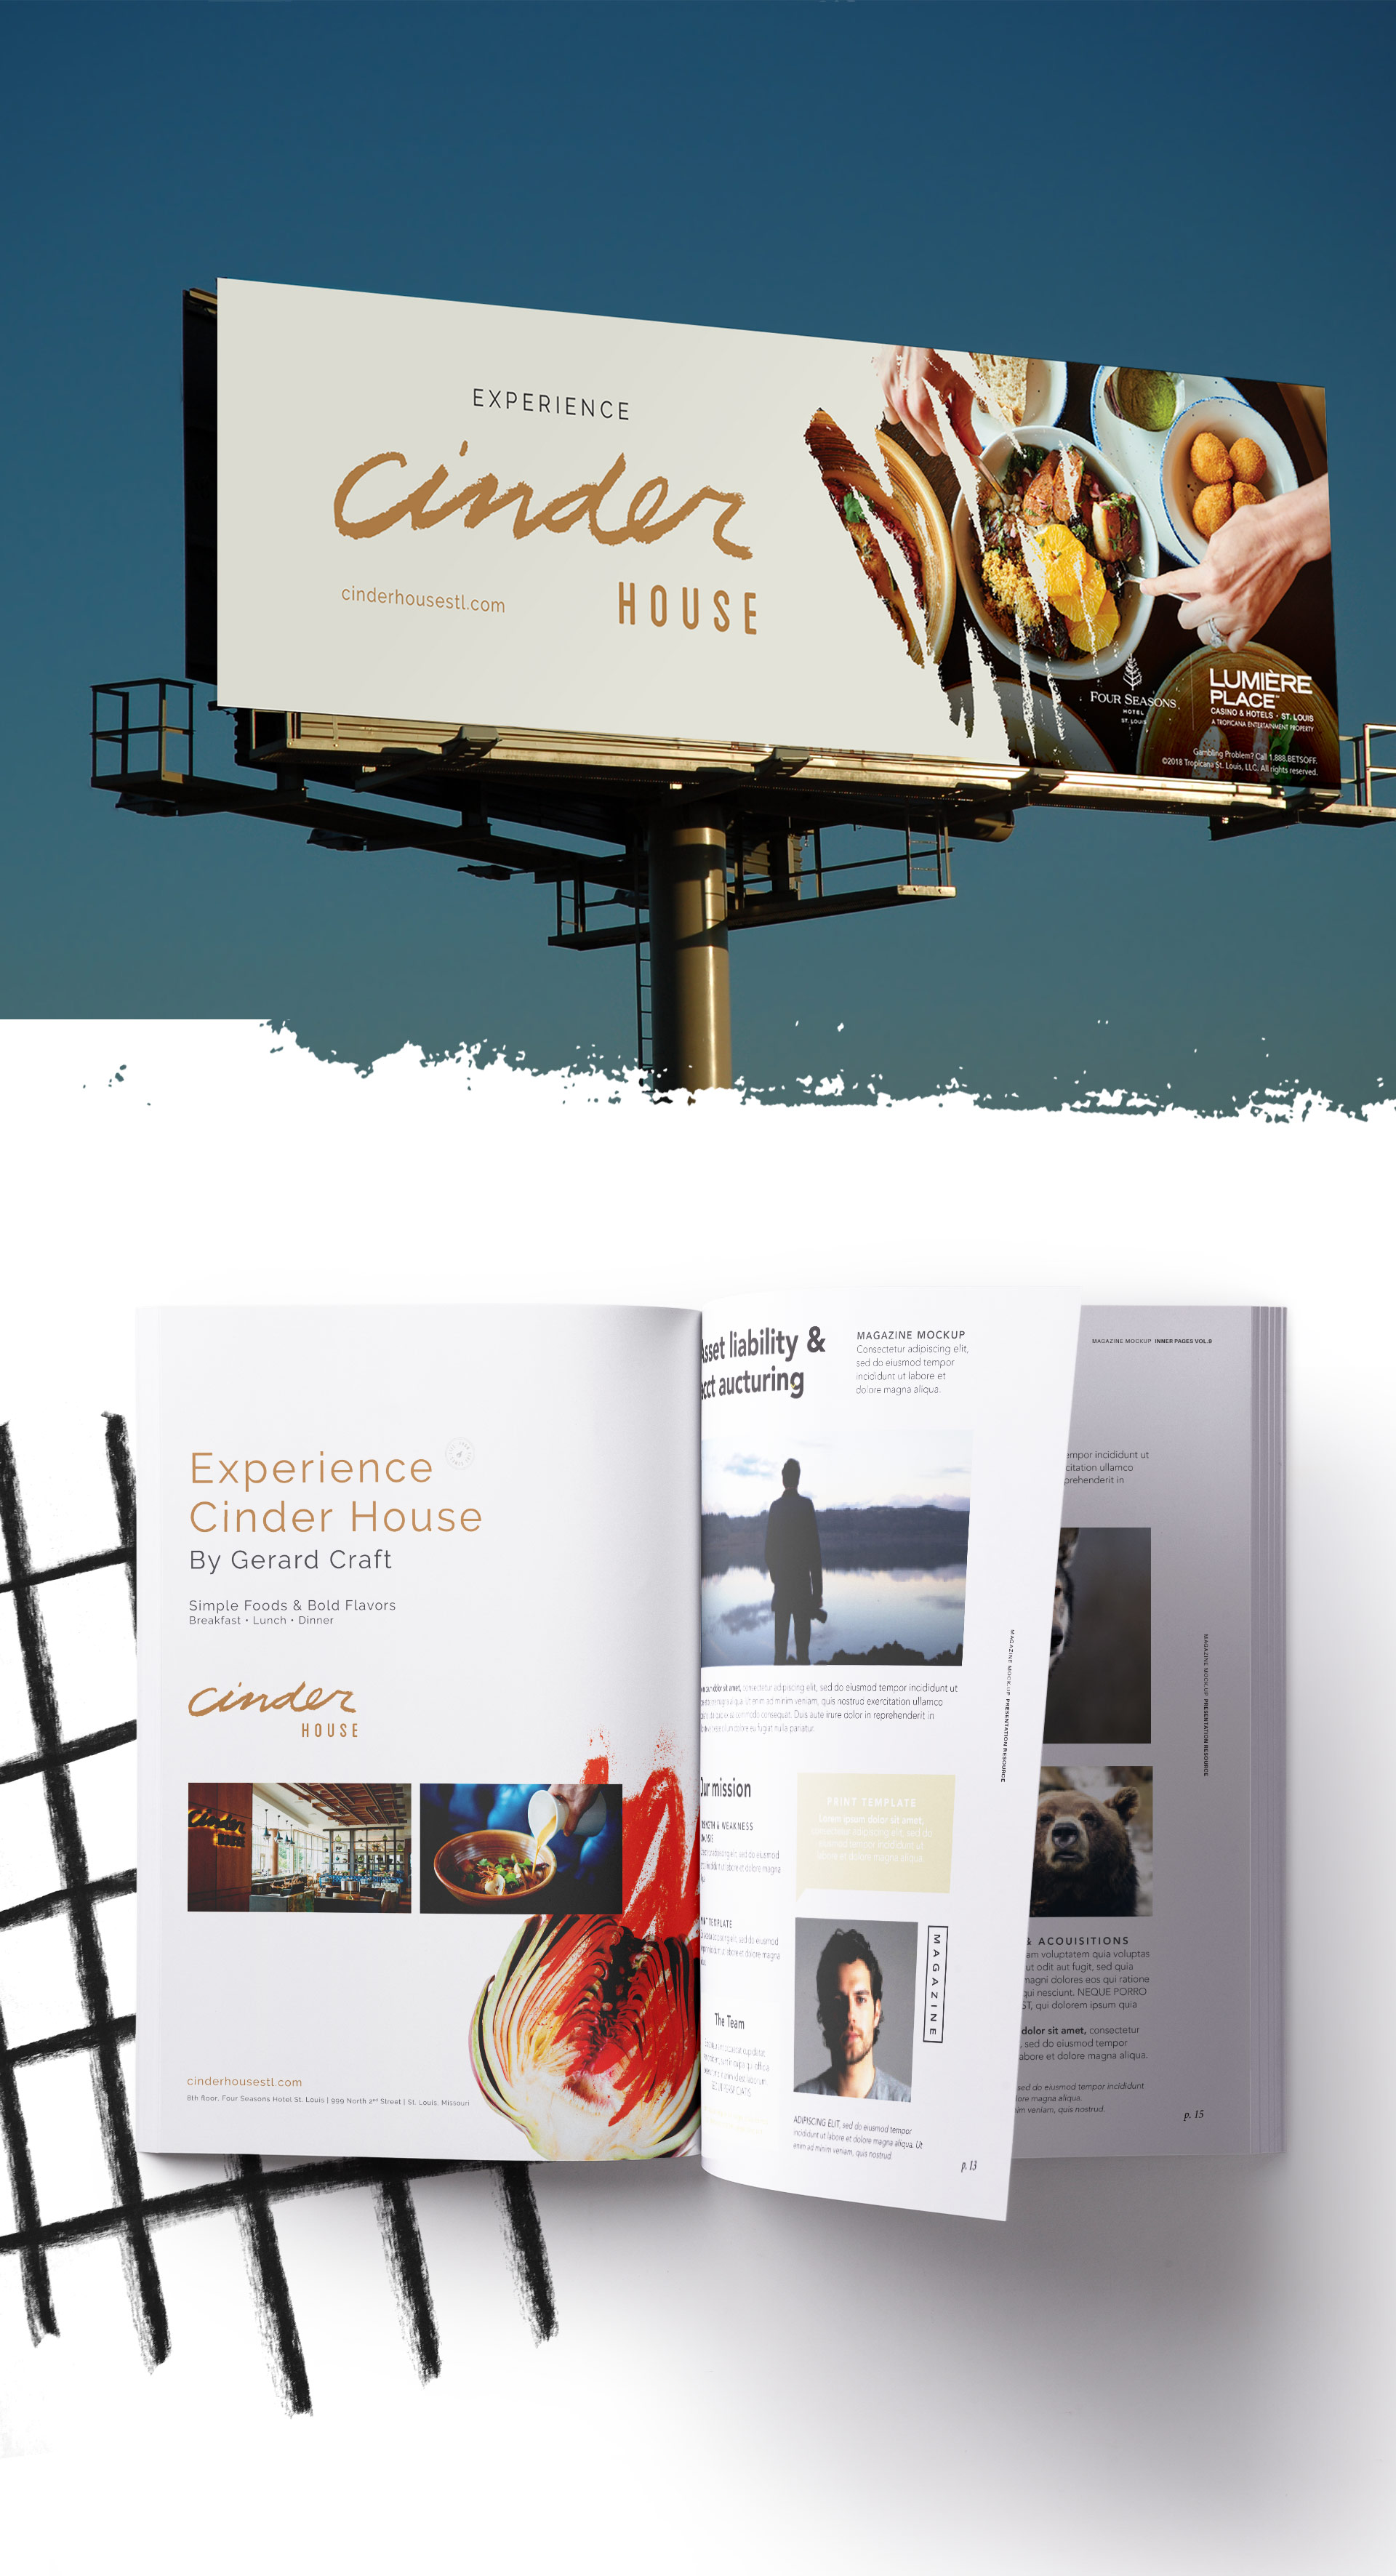 Cinder House billboard and print advertisements